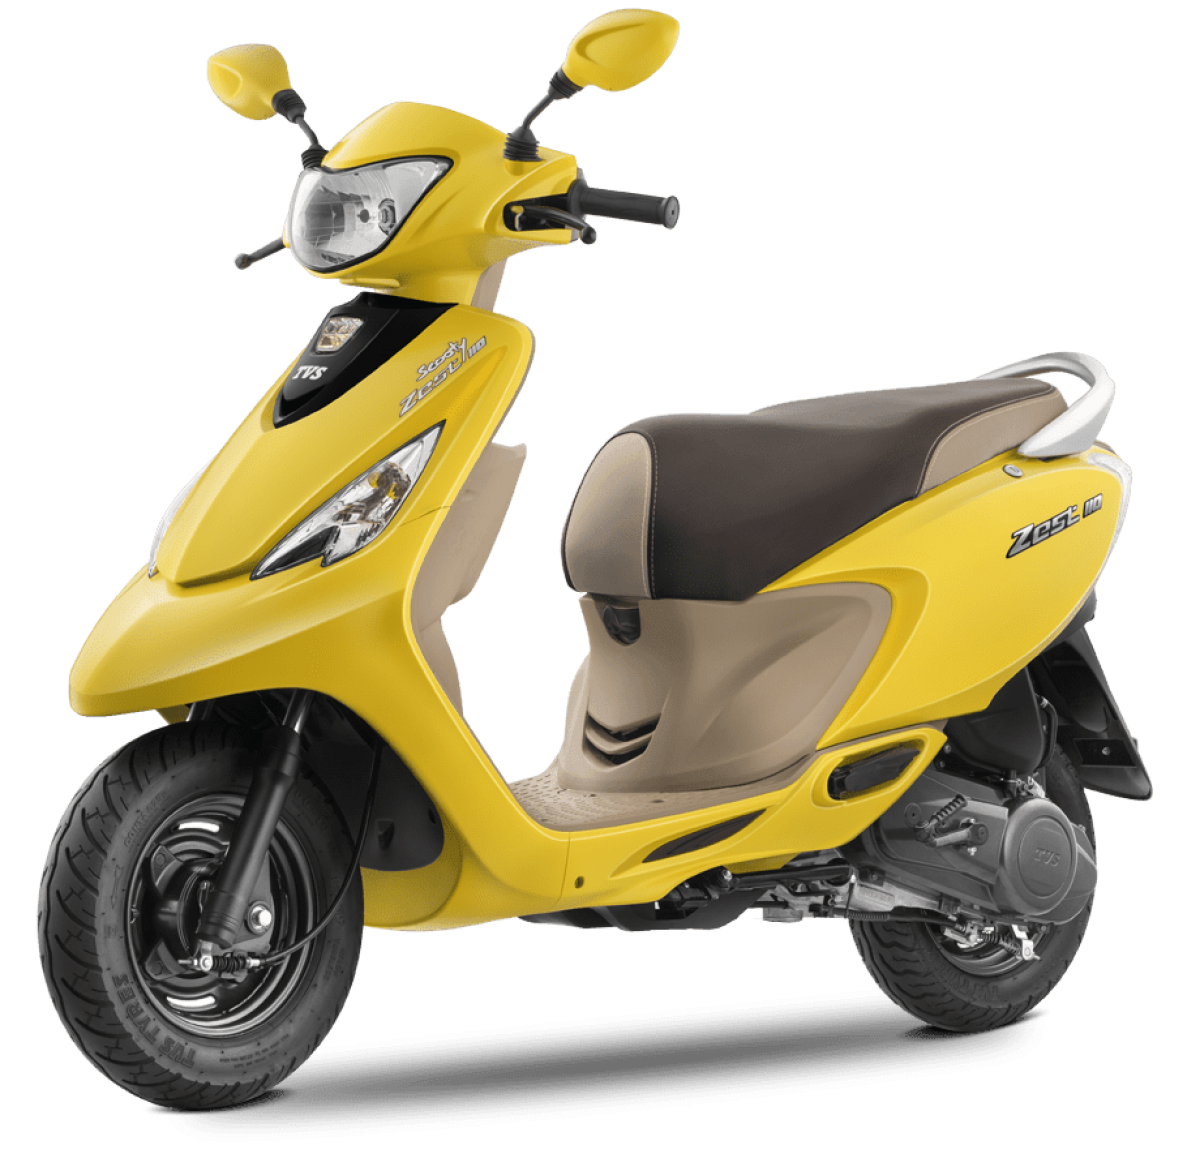 2017 Tvs Scooty Zest 110 Price Images Specifications Features